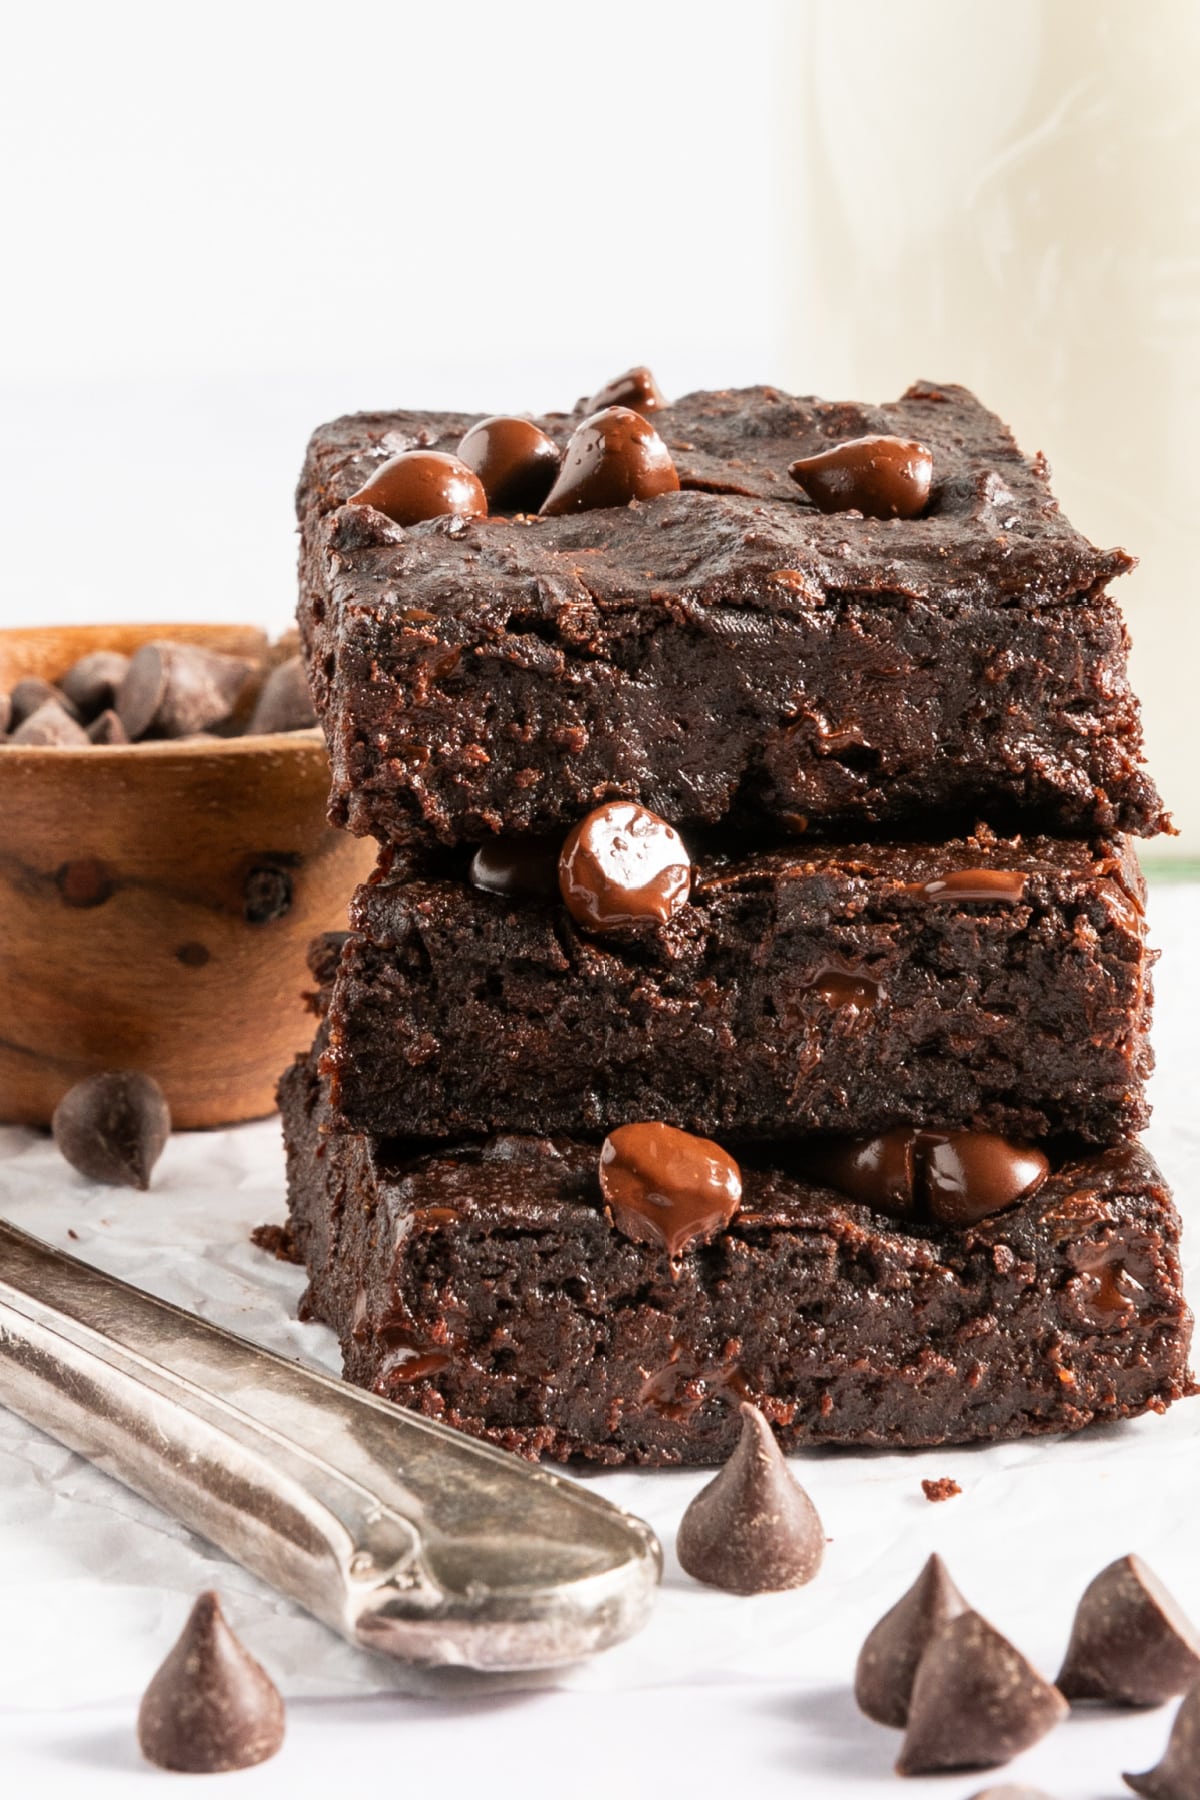 A stack of three gluten free black bean brownies with chocolate chips sitting on a white surface next to a silver butter knife. A small bowl of chocolate chips in background, chocolate chips scattered around.